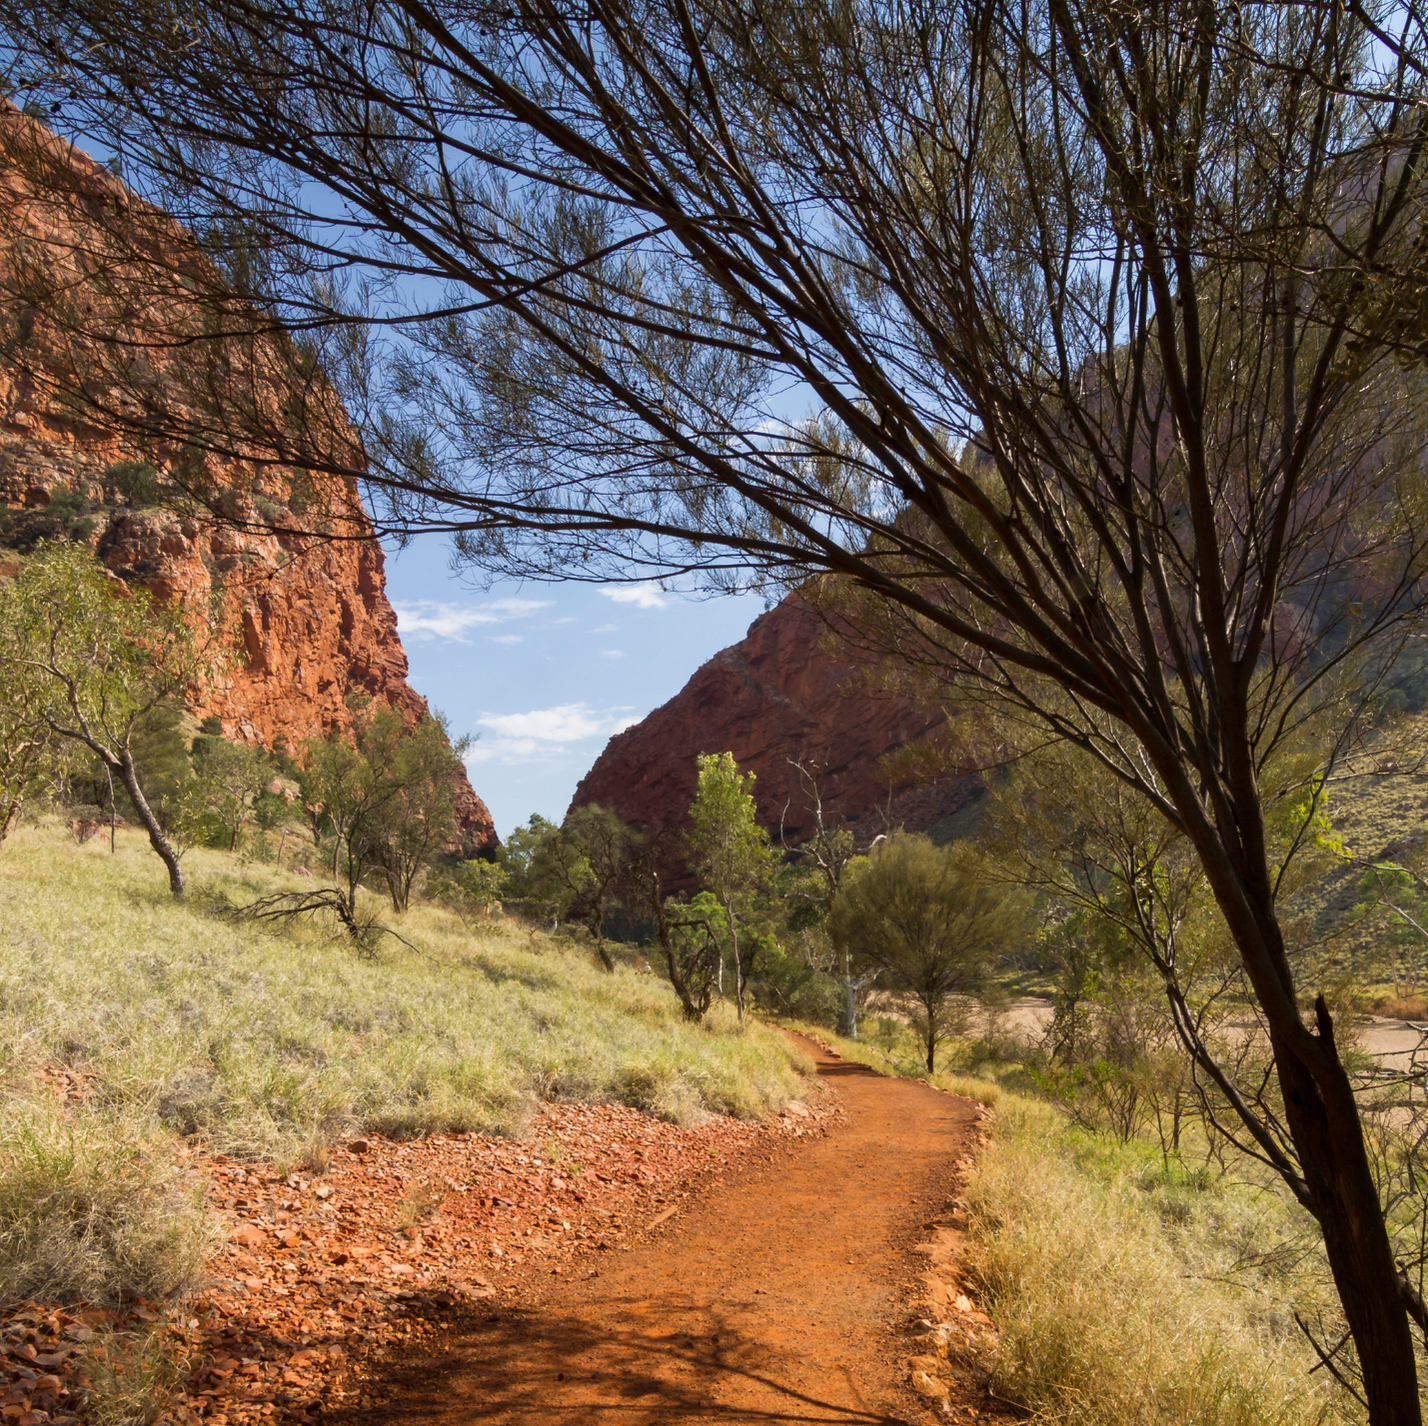 A dirt path with trees on both sides and a mountain in the background